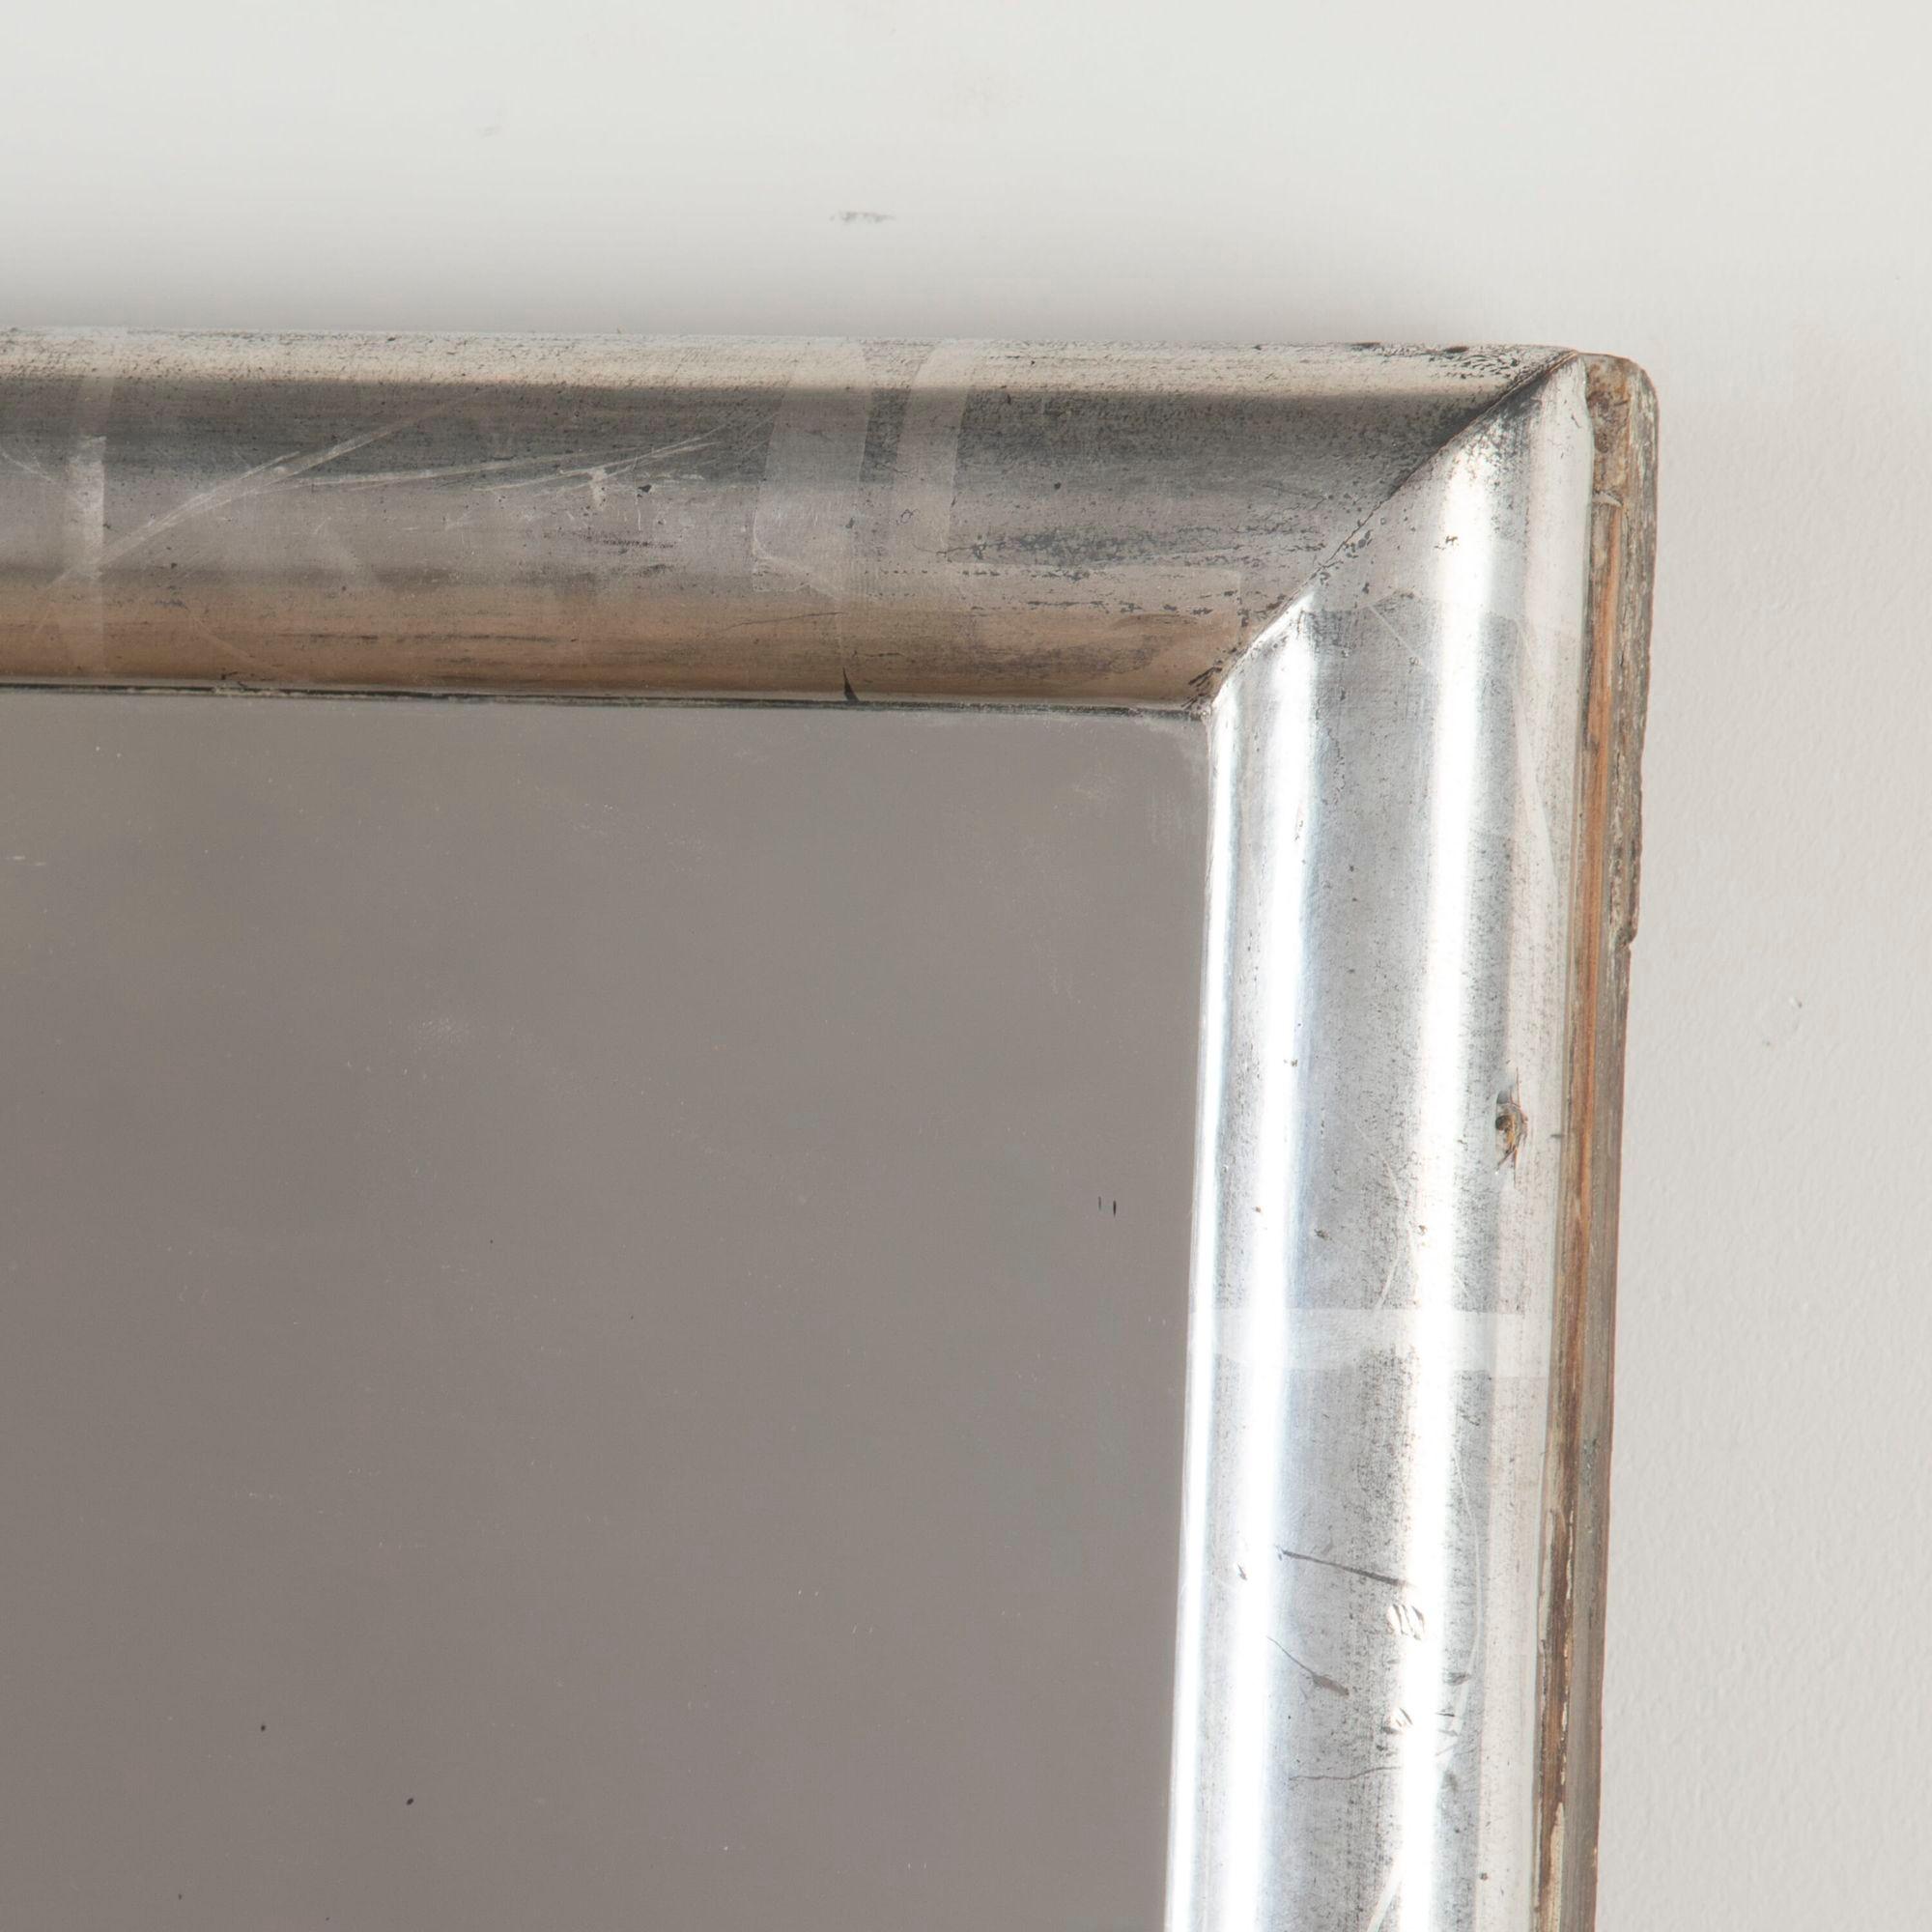 Late 19th century silver bistro mirror with original plate.
These elegantly simple frames were very modern in their time, echoing the impressionist's disdain for any overt decoration.
They were usually hung landscape behind the bars in French